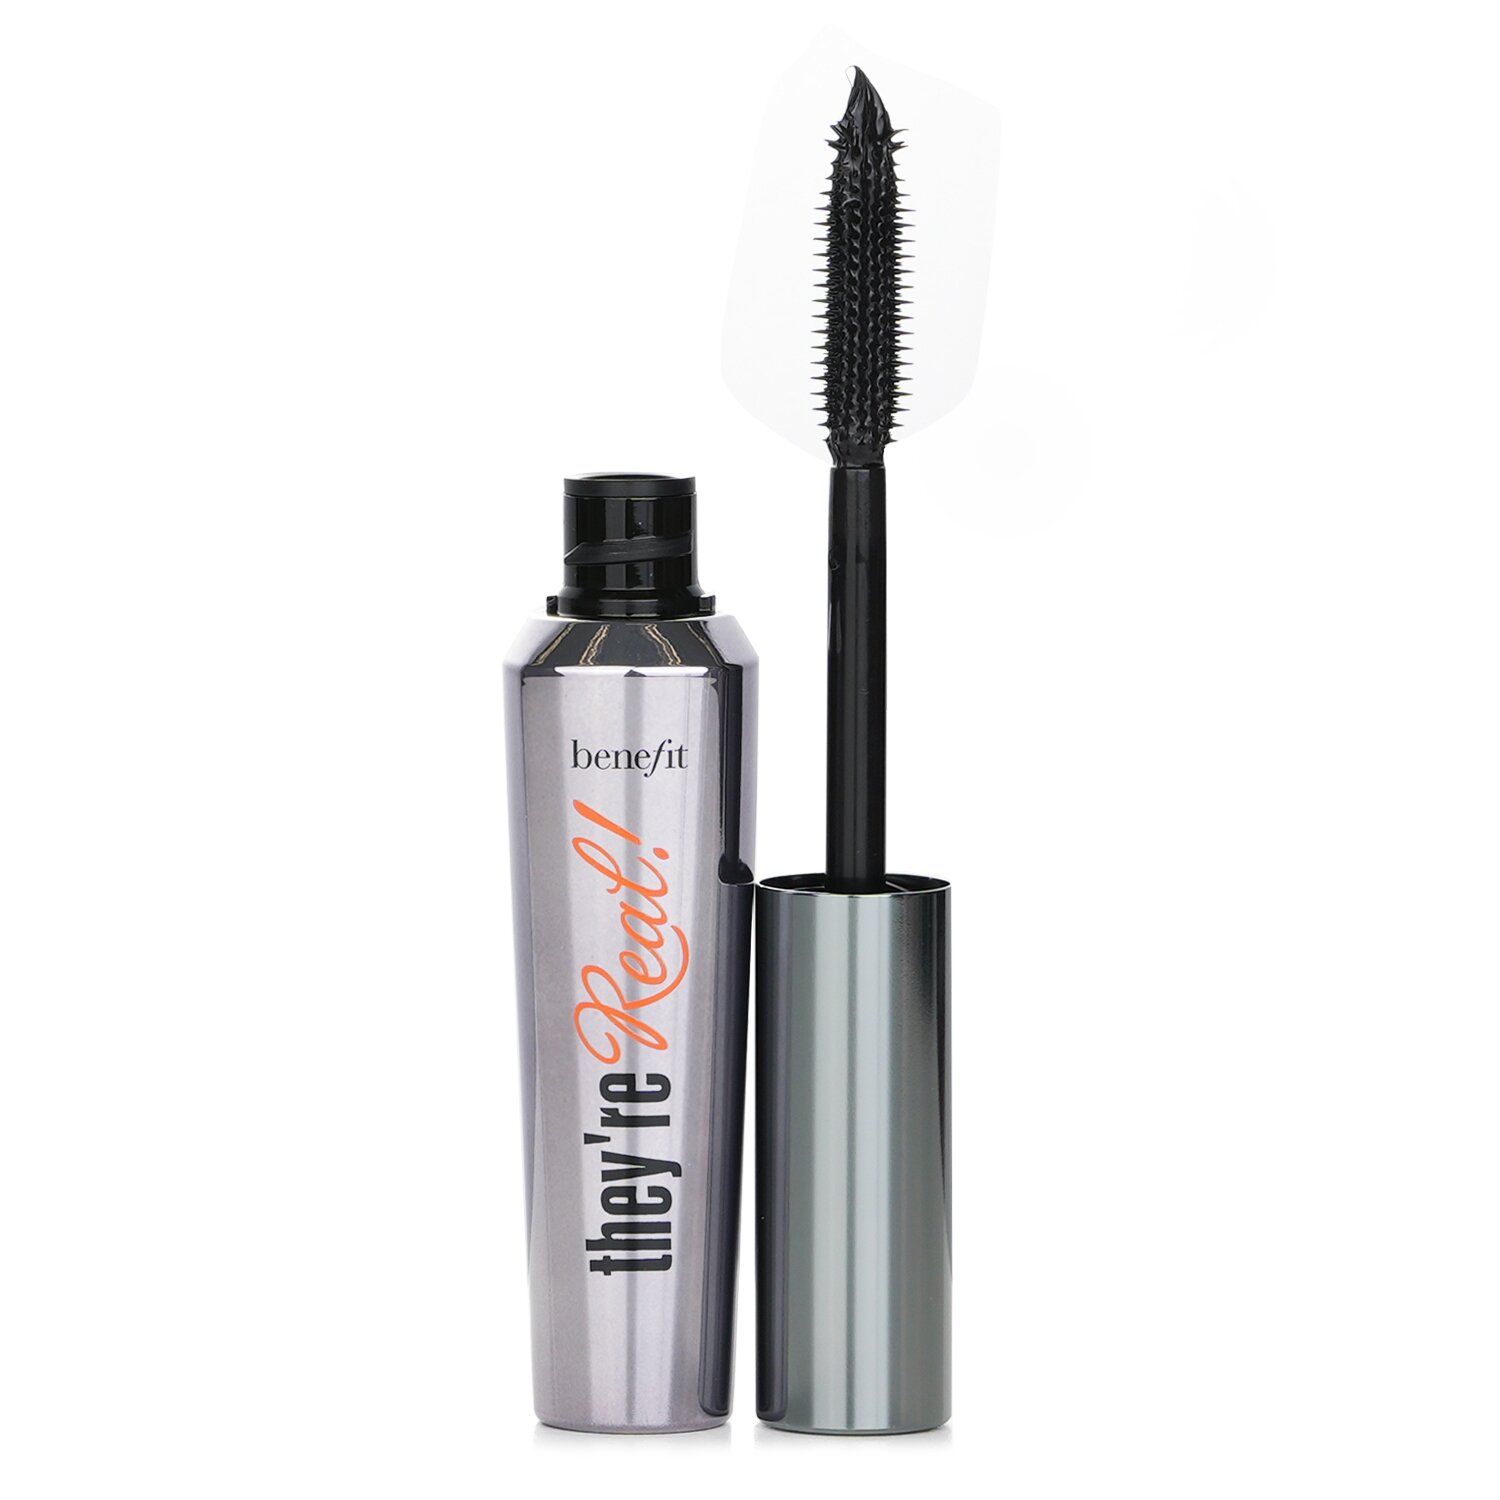 Benefit They're Real Beyond Mascara 8.5g/0.3oz